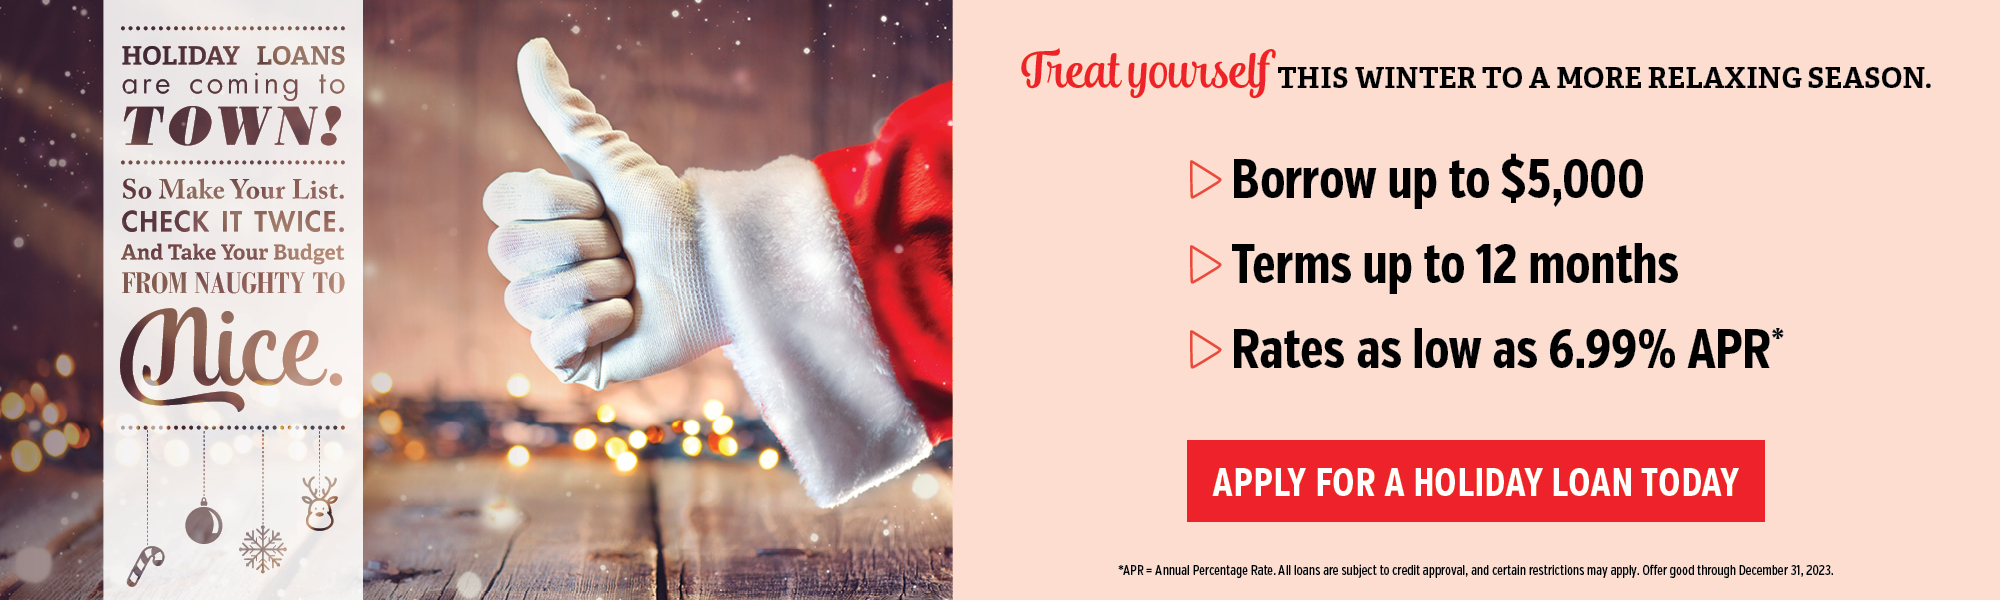 Holiday loan. borrow up to $5,000 for a low rate. Click to learn more.